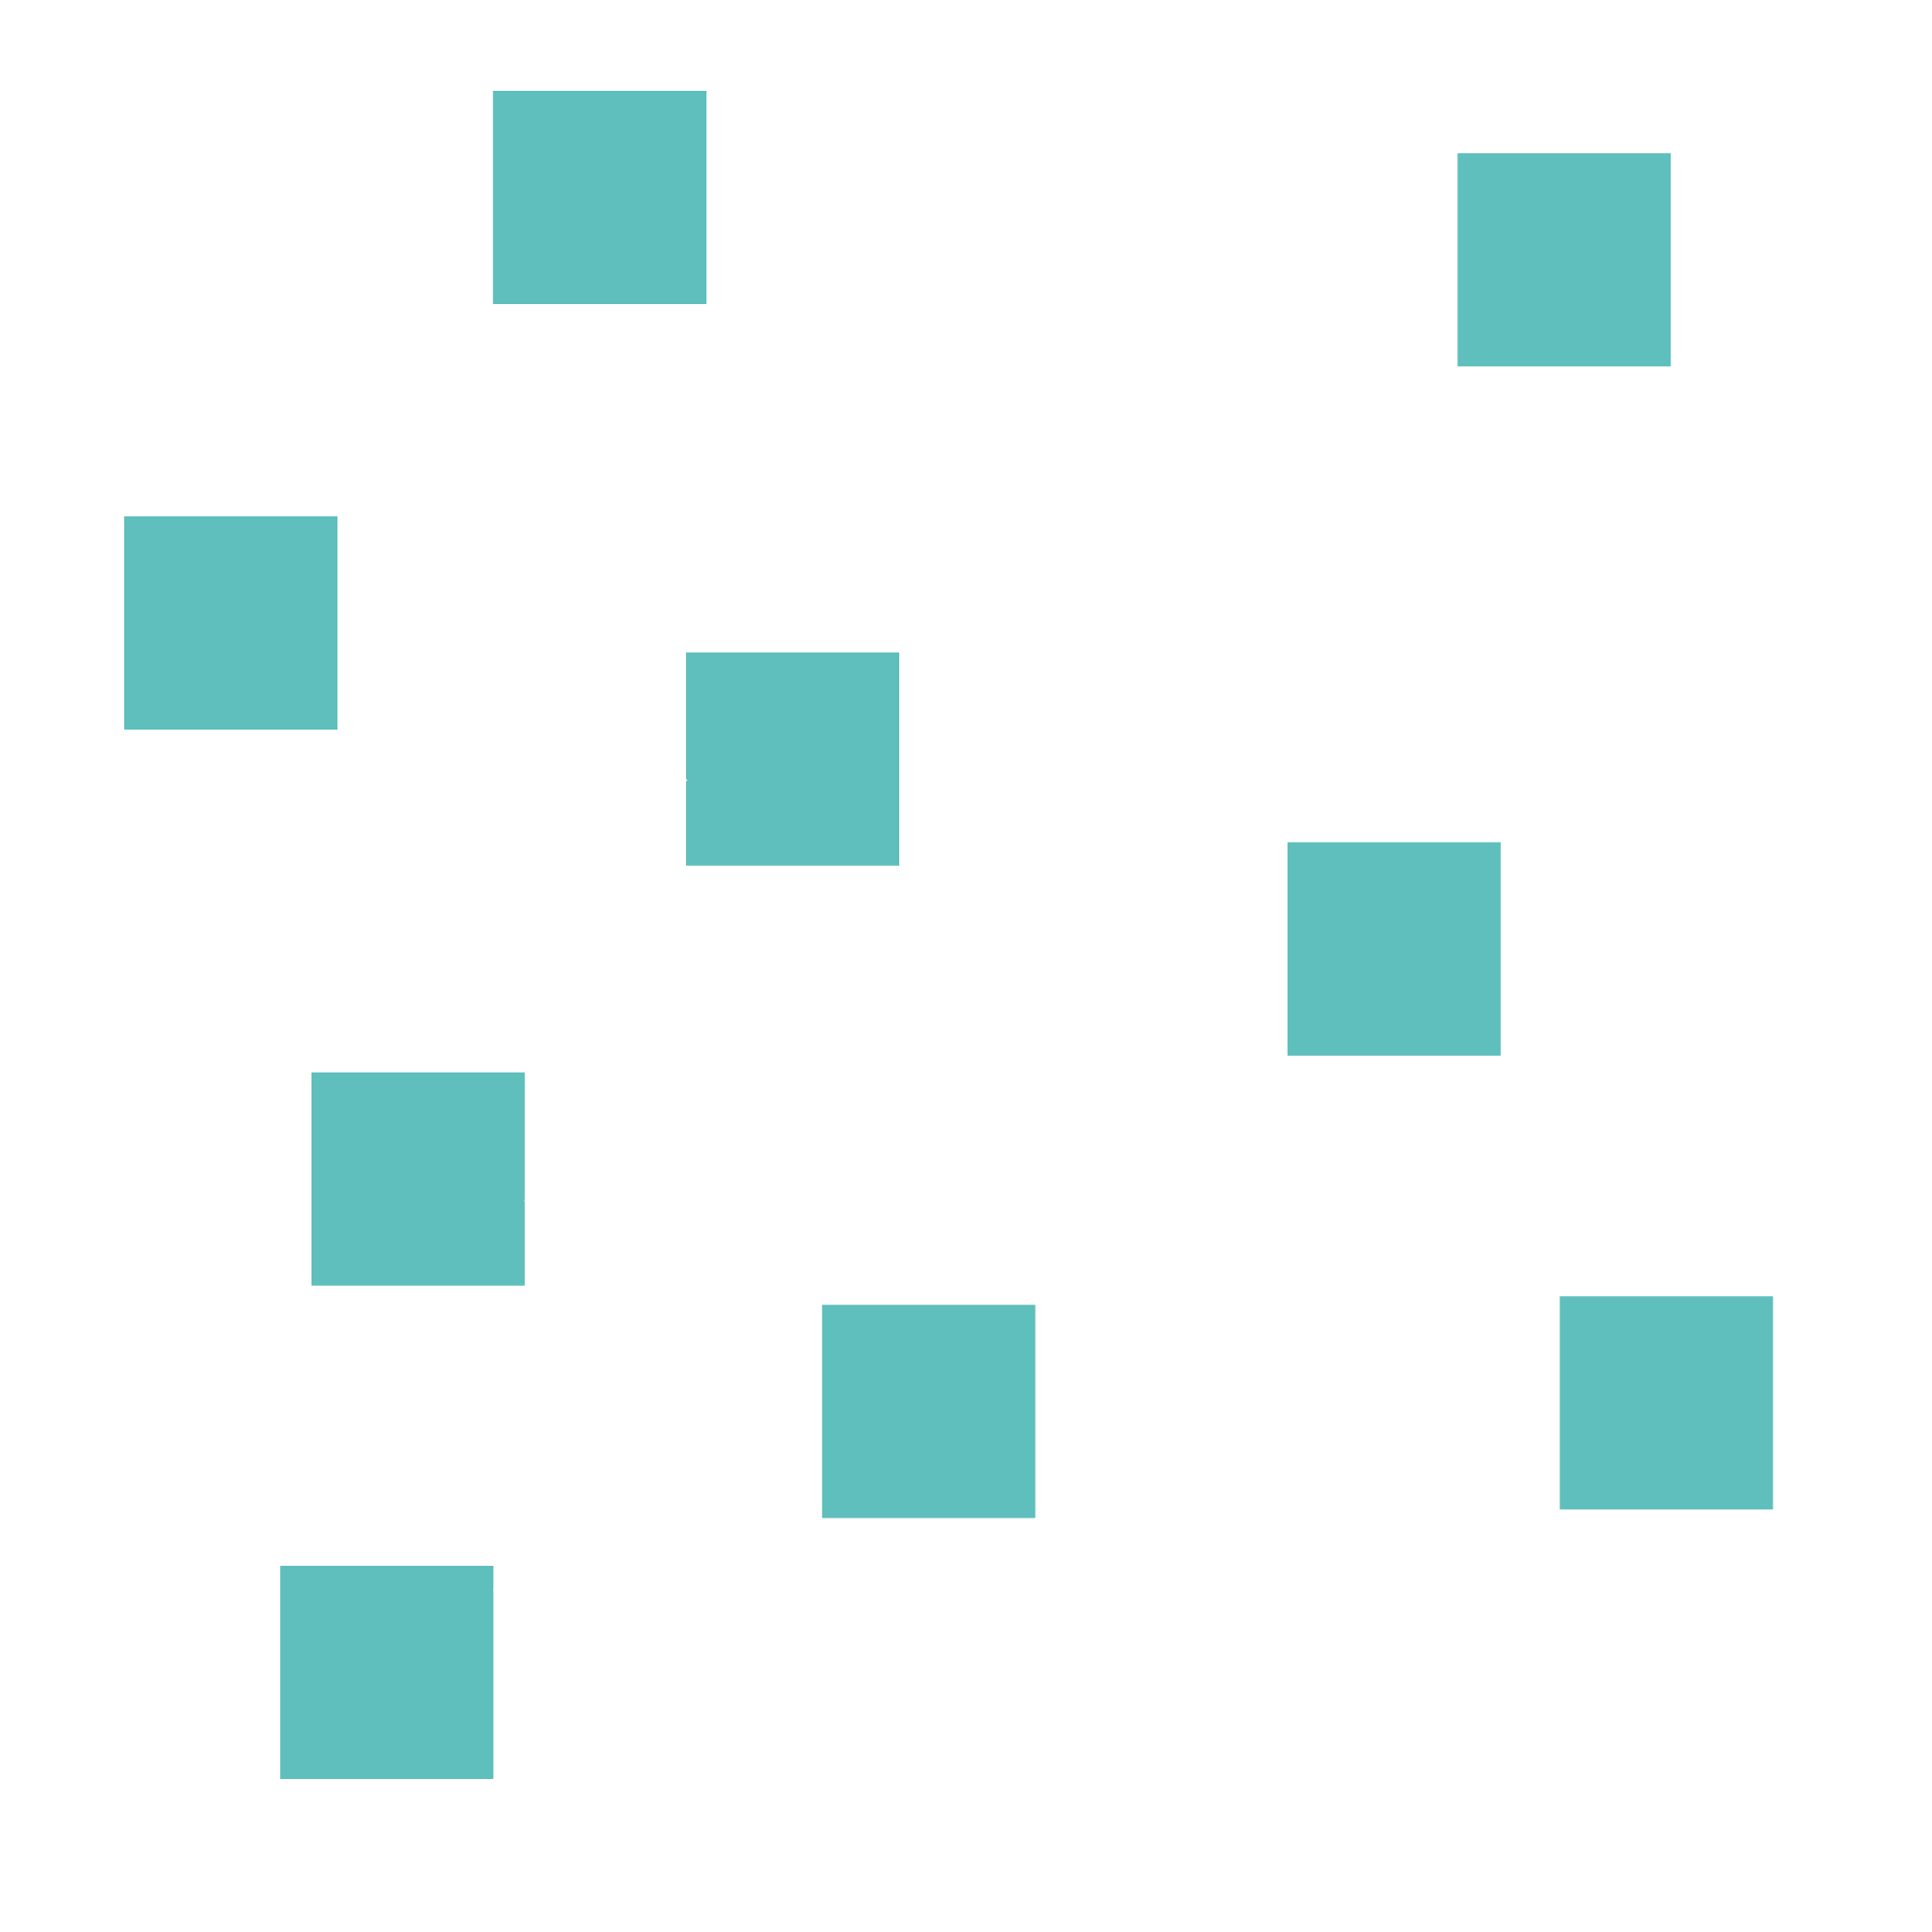 an infographic illustration of navigating a spiderweb of squares